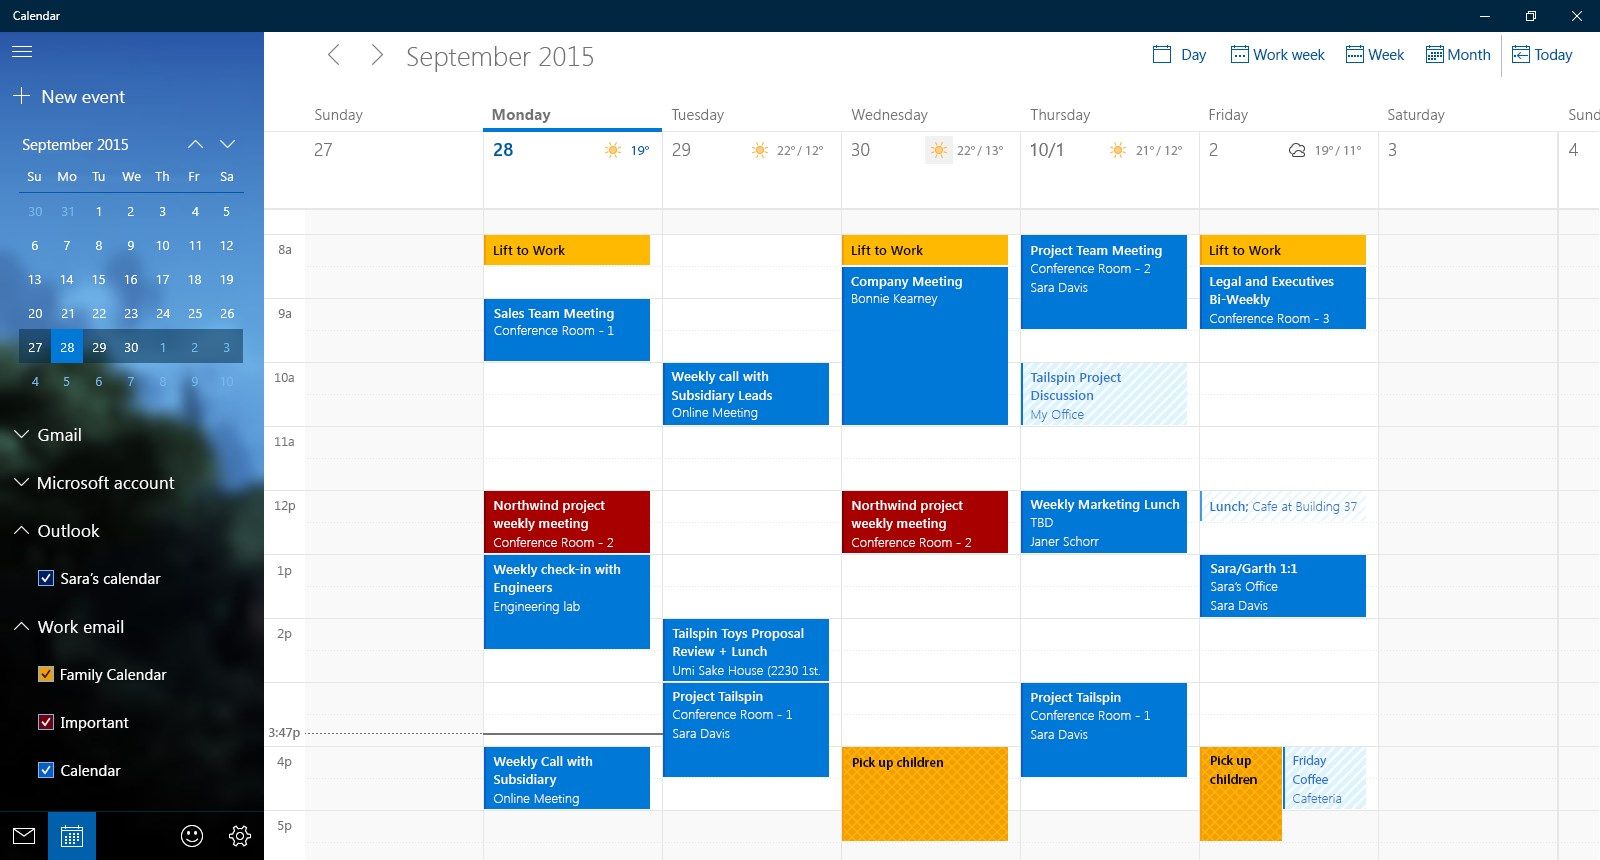 Calendar provides helpful, powerful views of your schedule like day, week, and month.